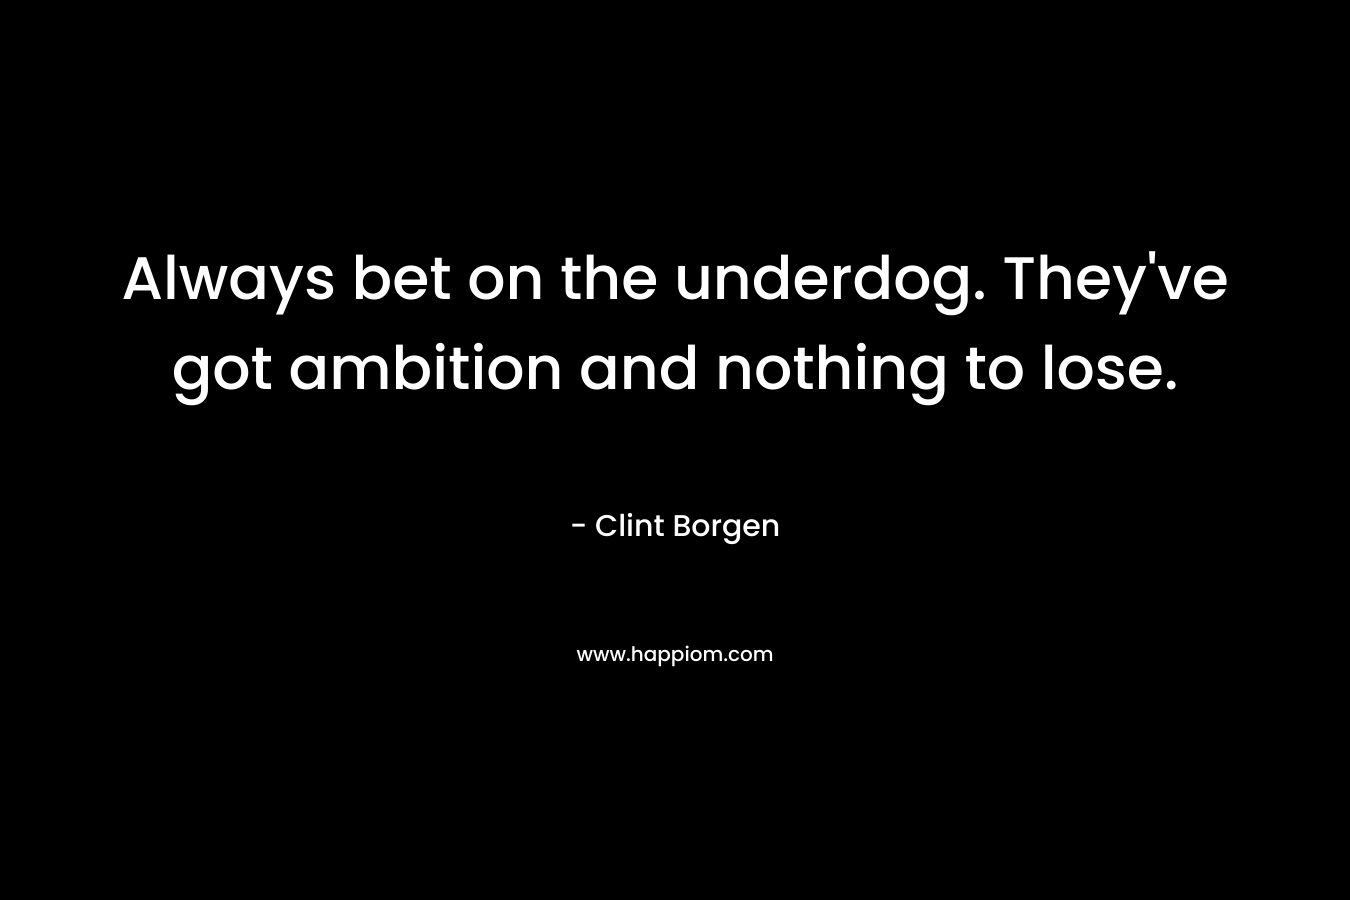 Always bet on the underdog. They've got ambition and nothing to lose.